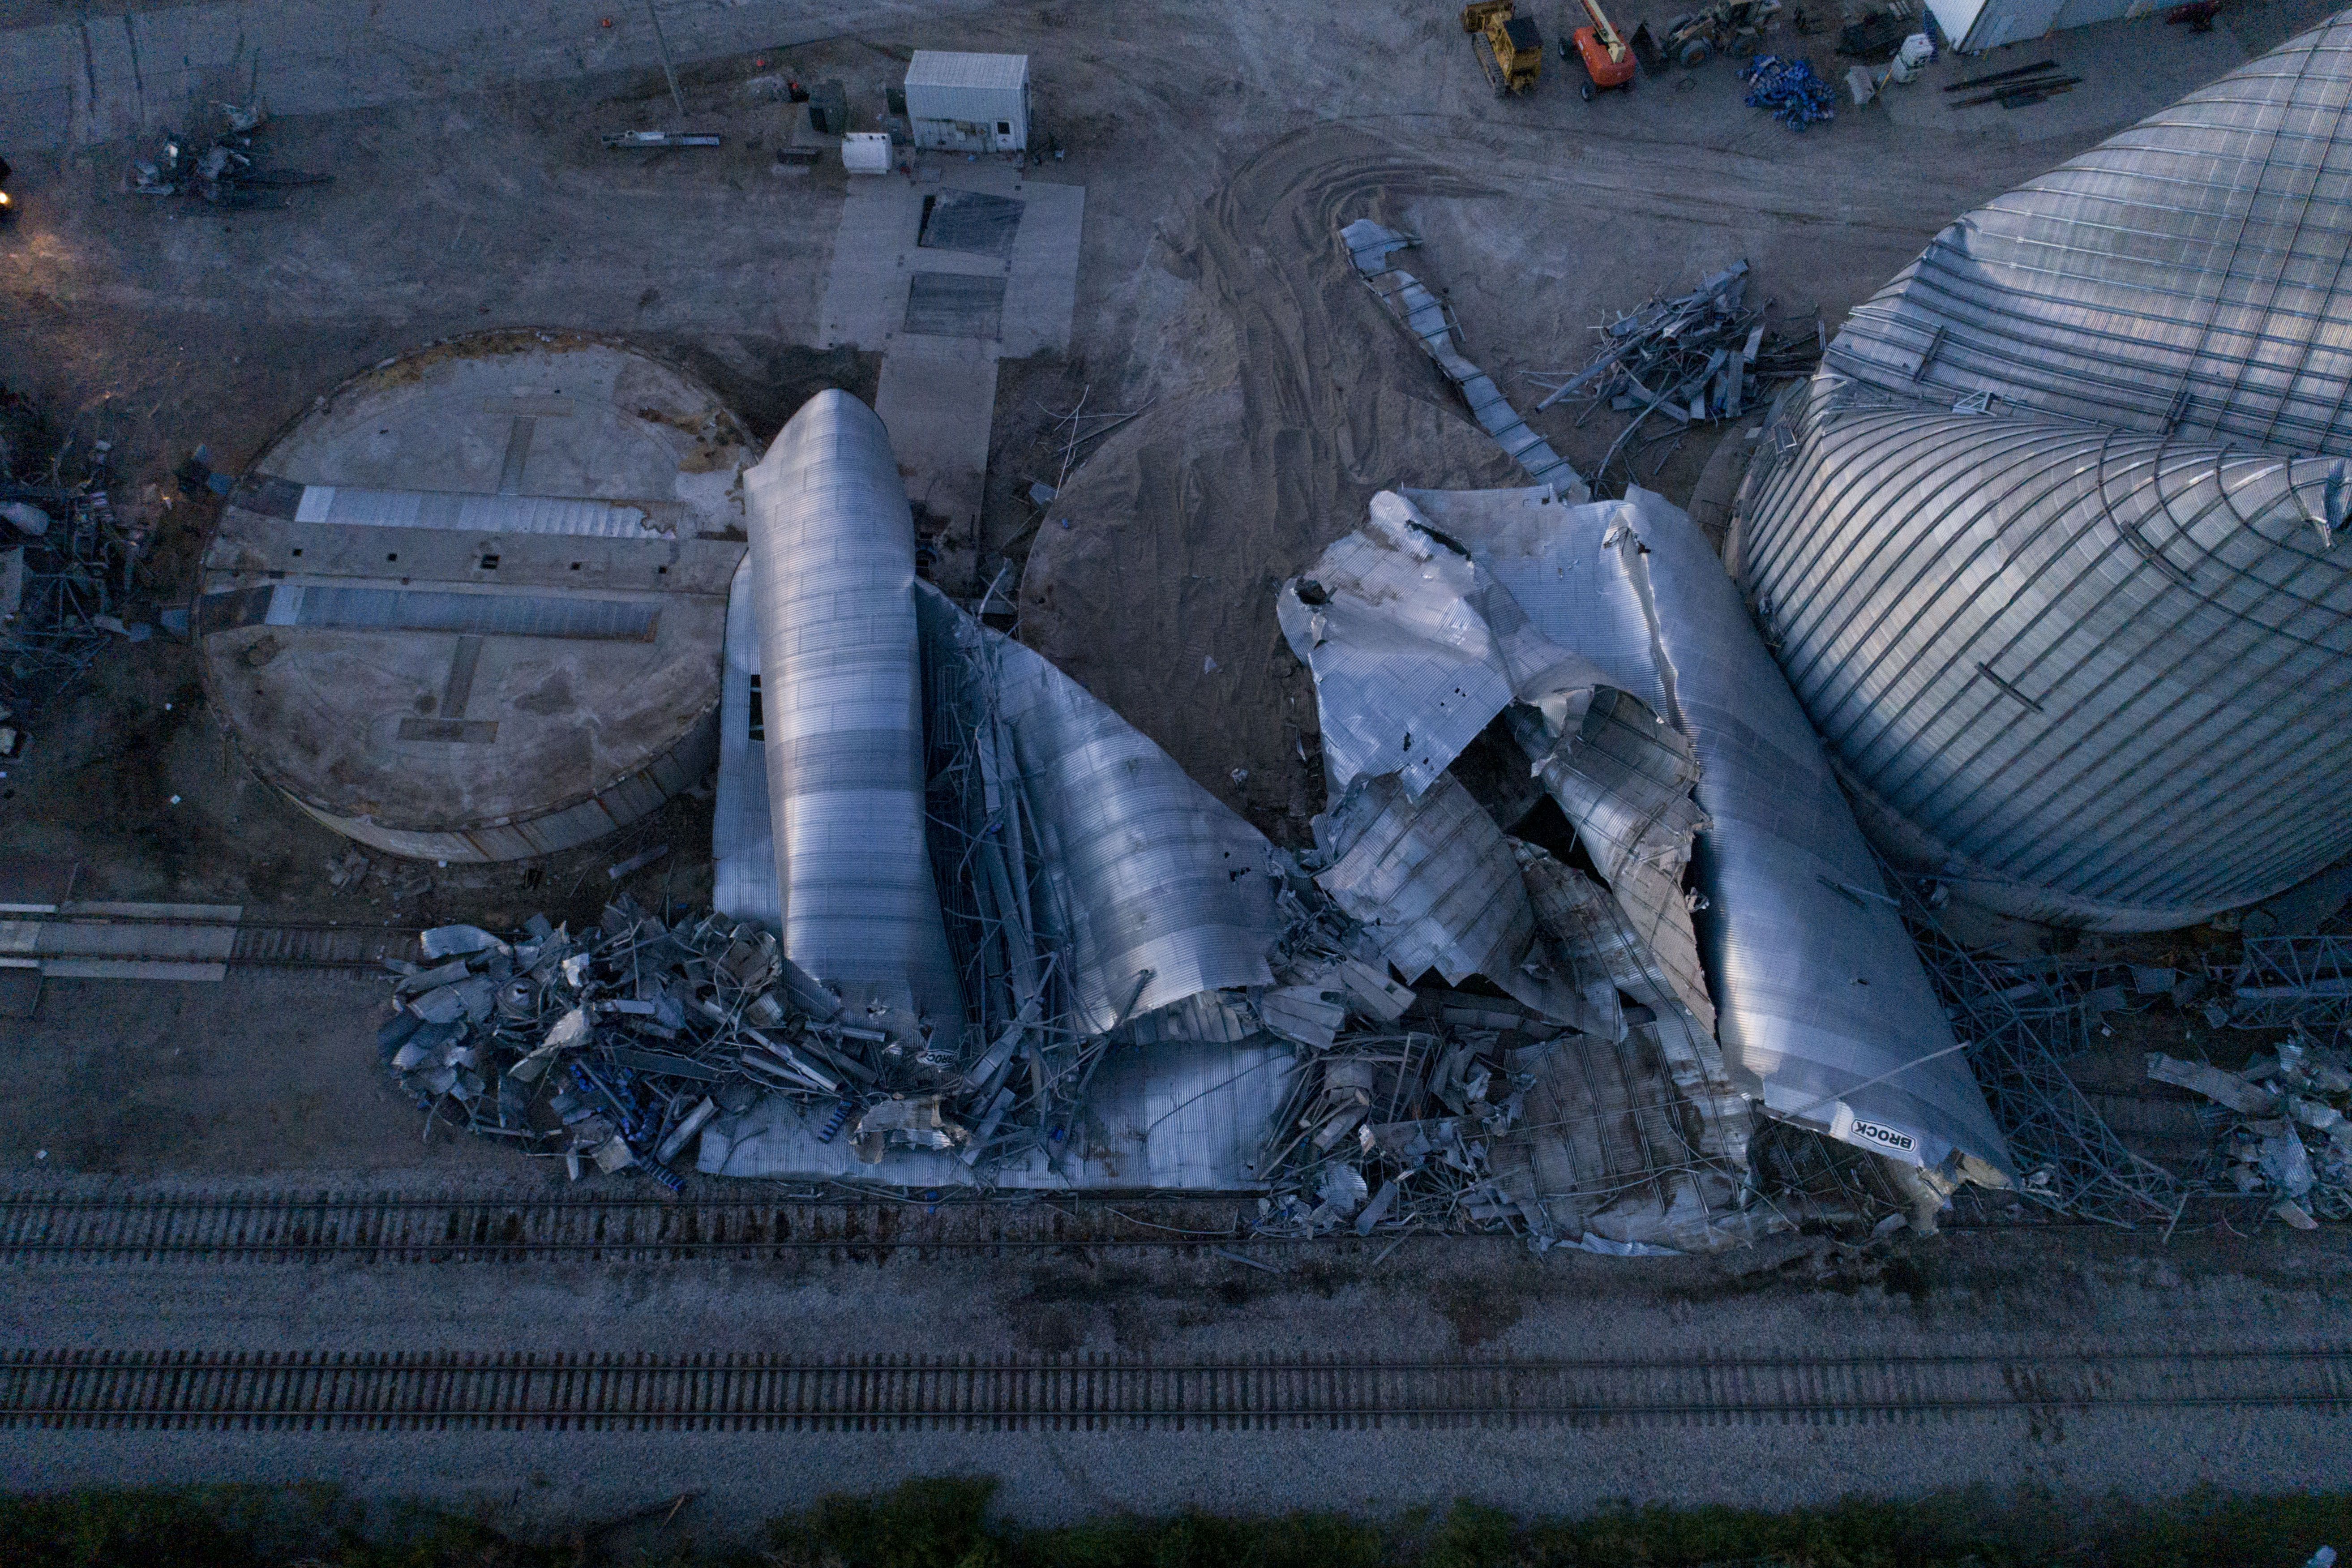 Crushed grain bins seen from overhead at night